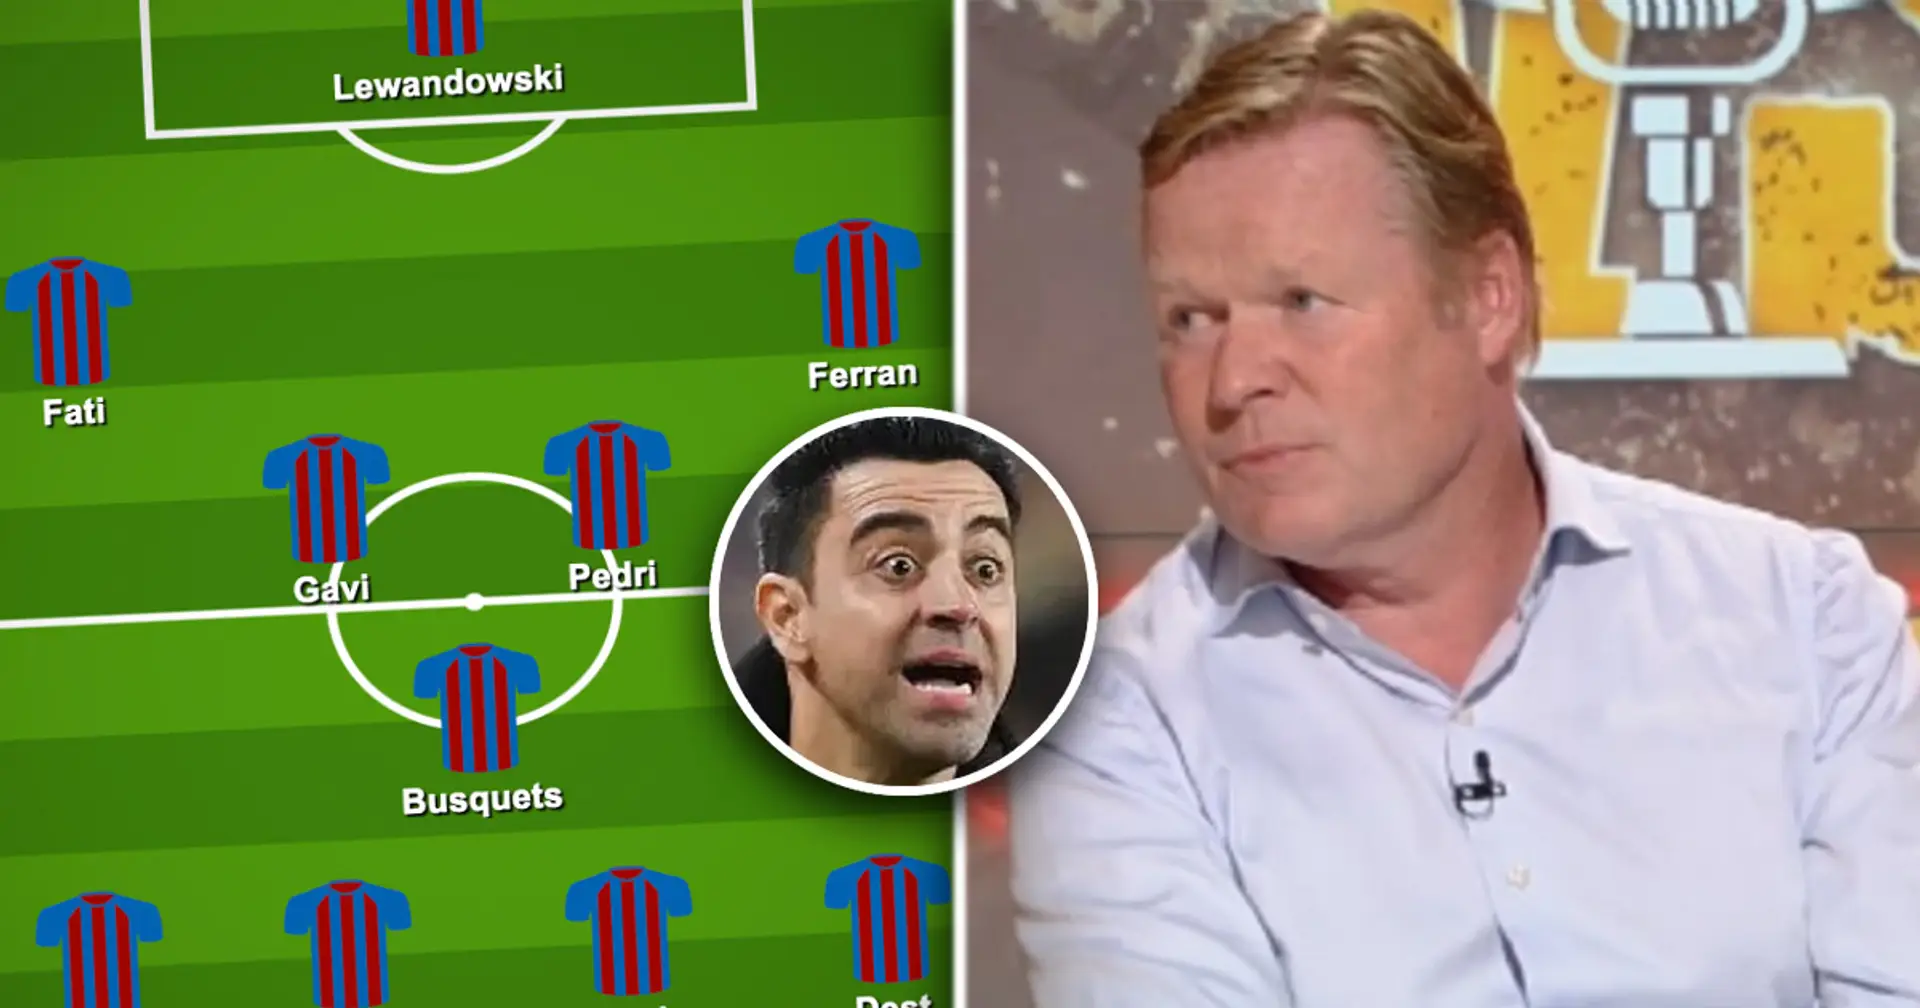 'They live in the past': Koeman criticises Barca for sticking with 4-3-3 formation